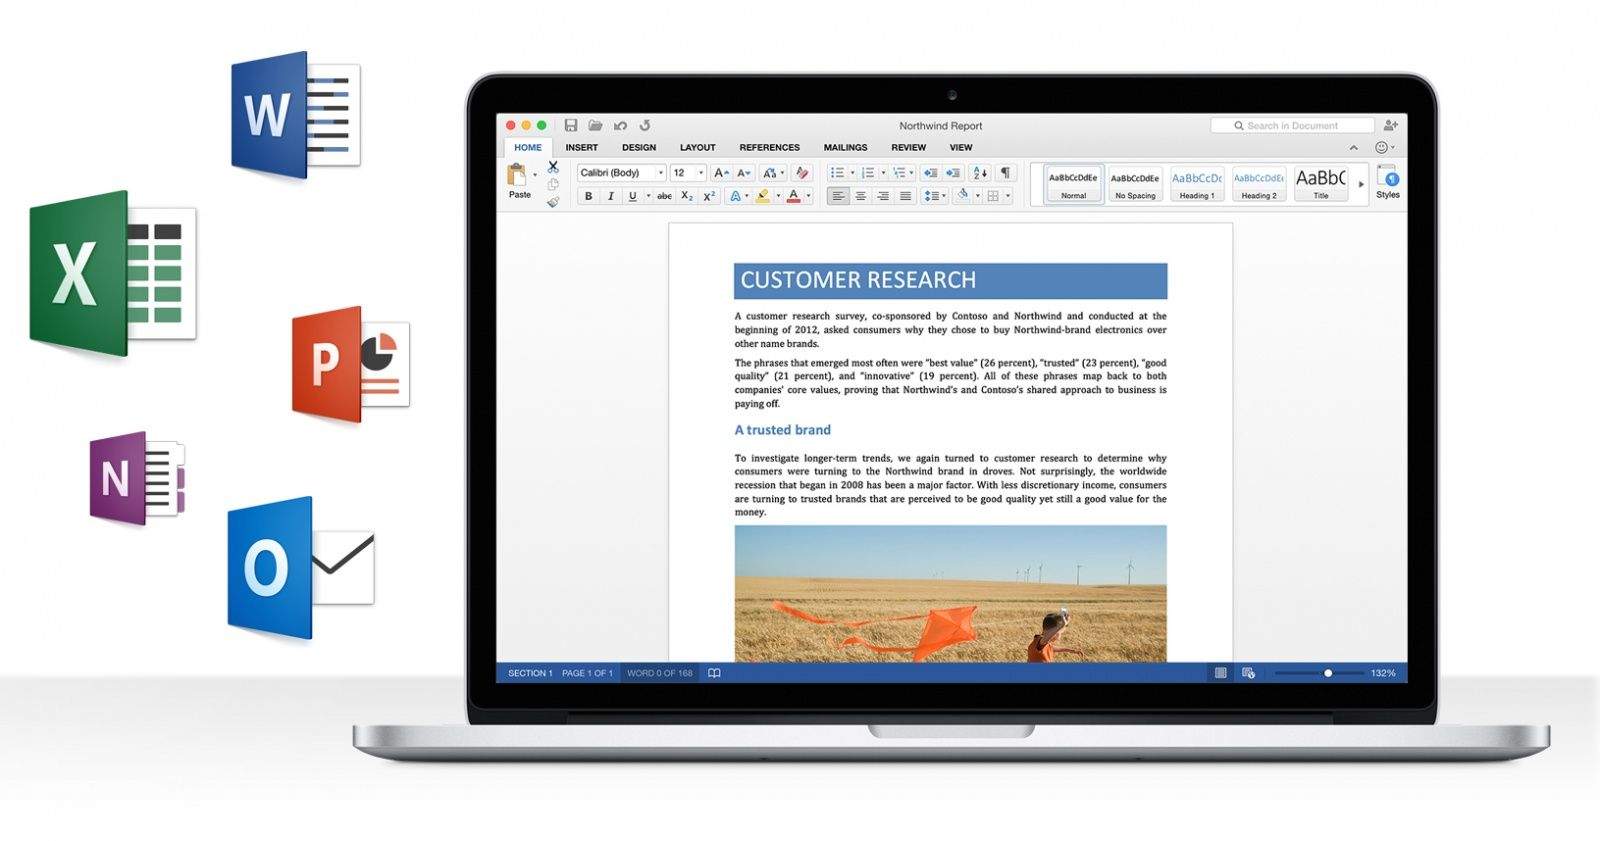 Download microsoft office for mac